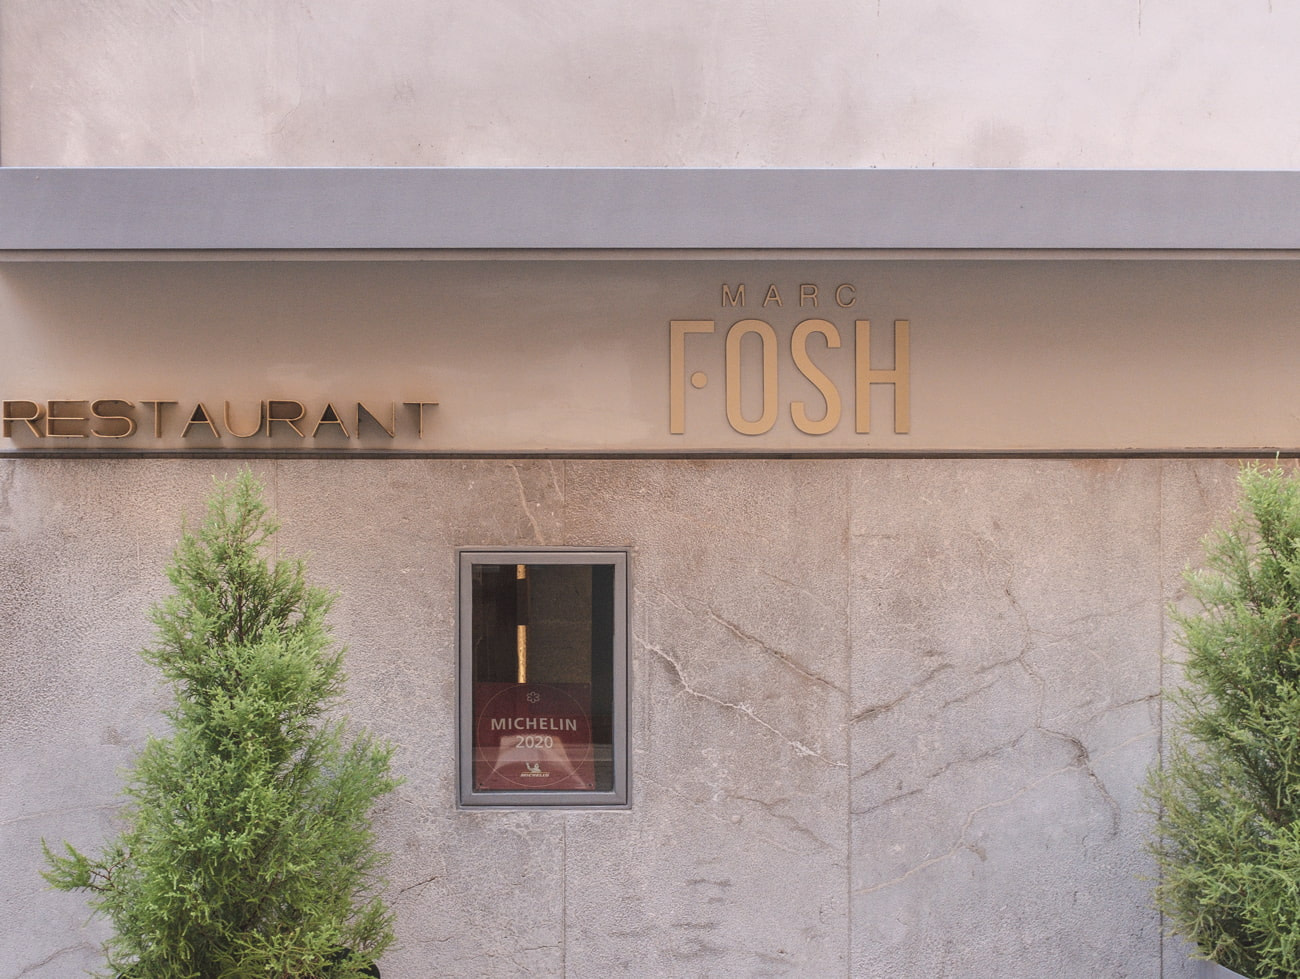 Michelin-starred lunch at Marc Fosh